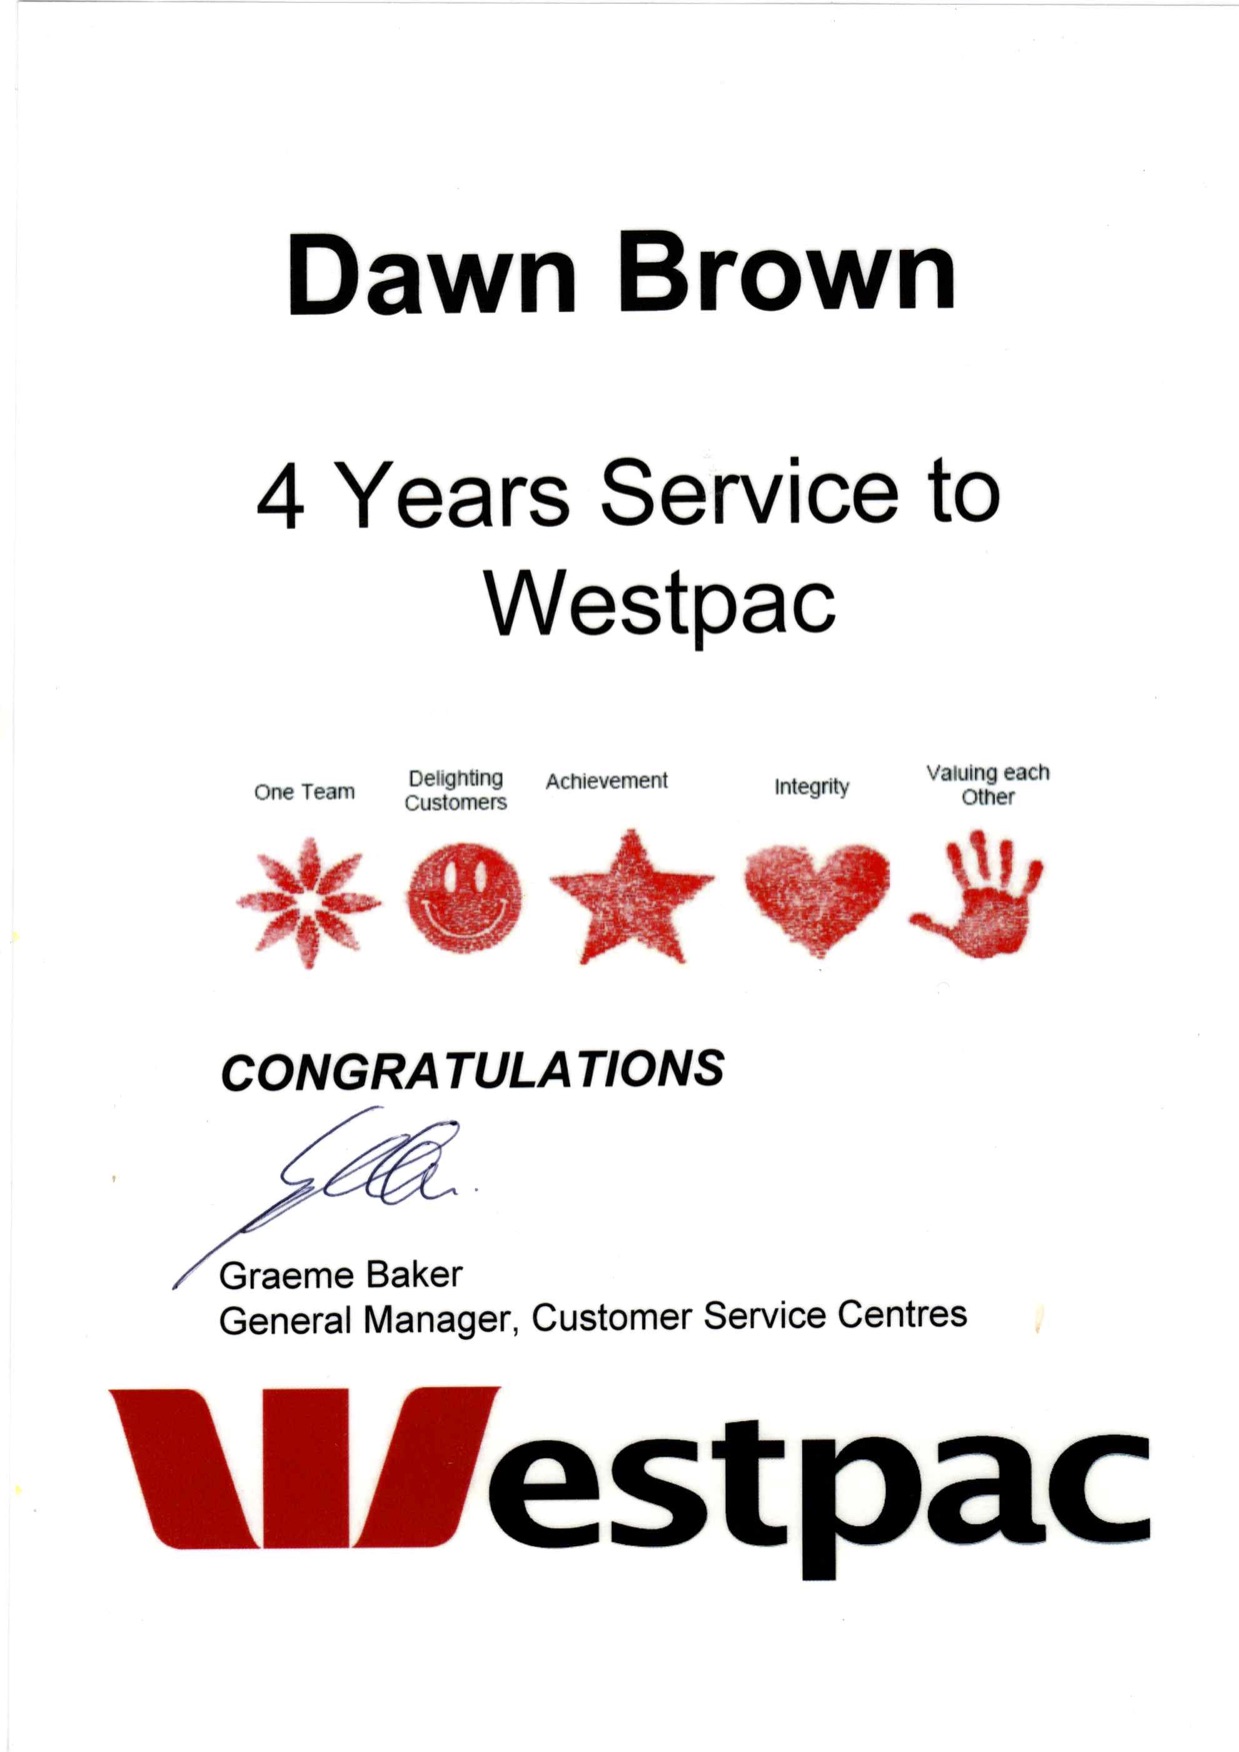 Four years service award sent to Dawn from Westpac bank